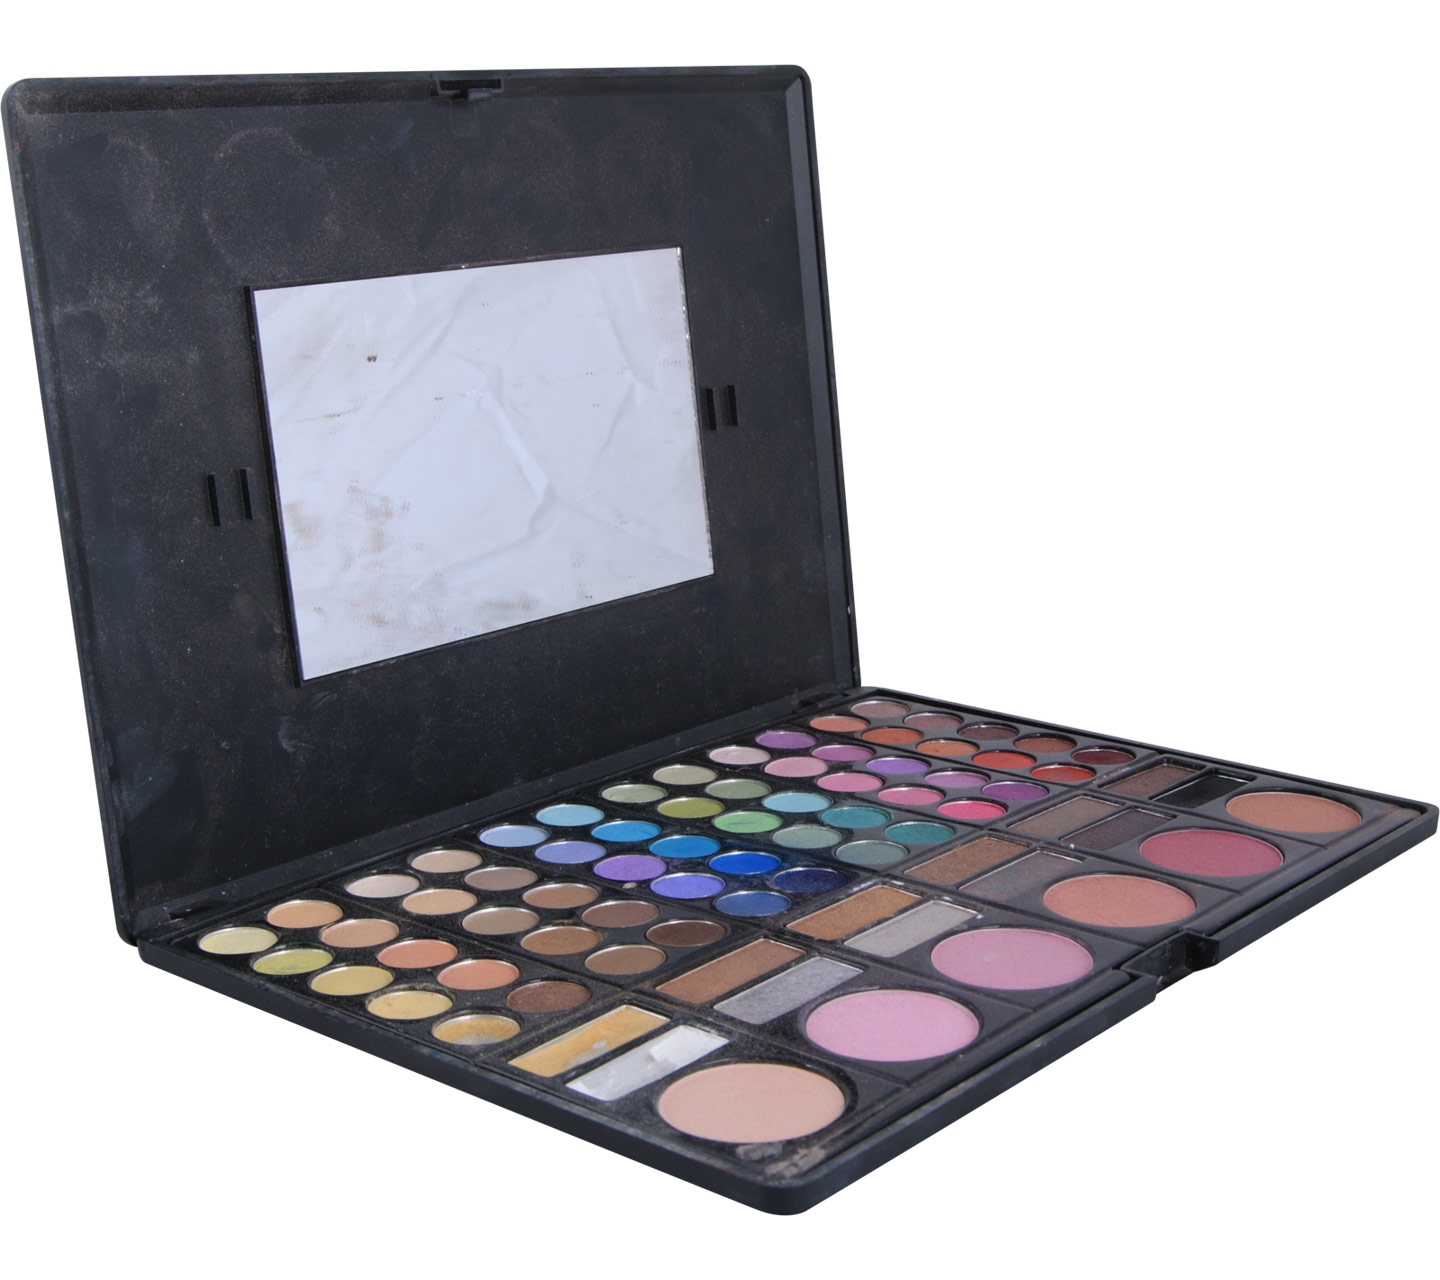 Coastal Scents 78 Eye Shadow & Blush Combo Palette Sets and Palette